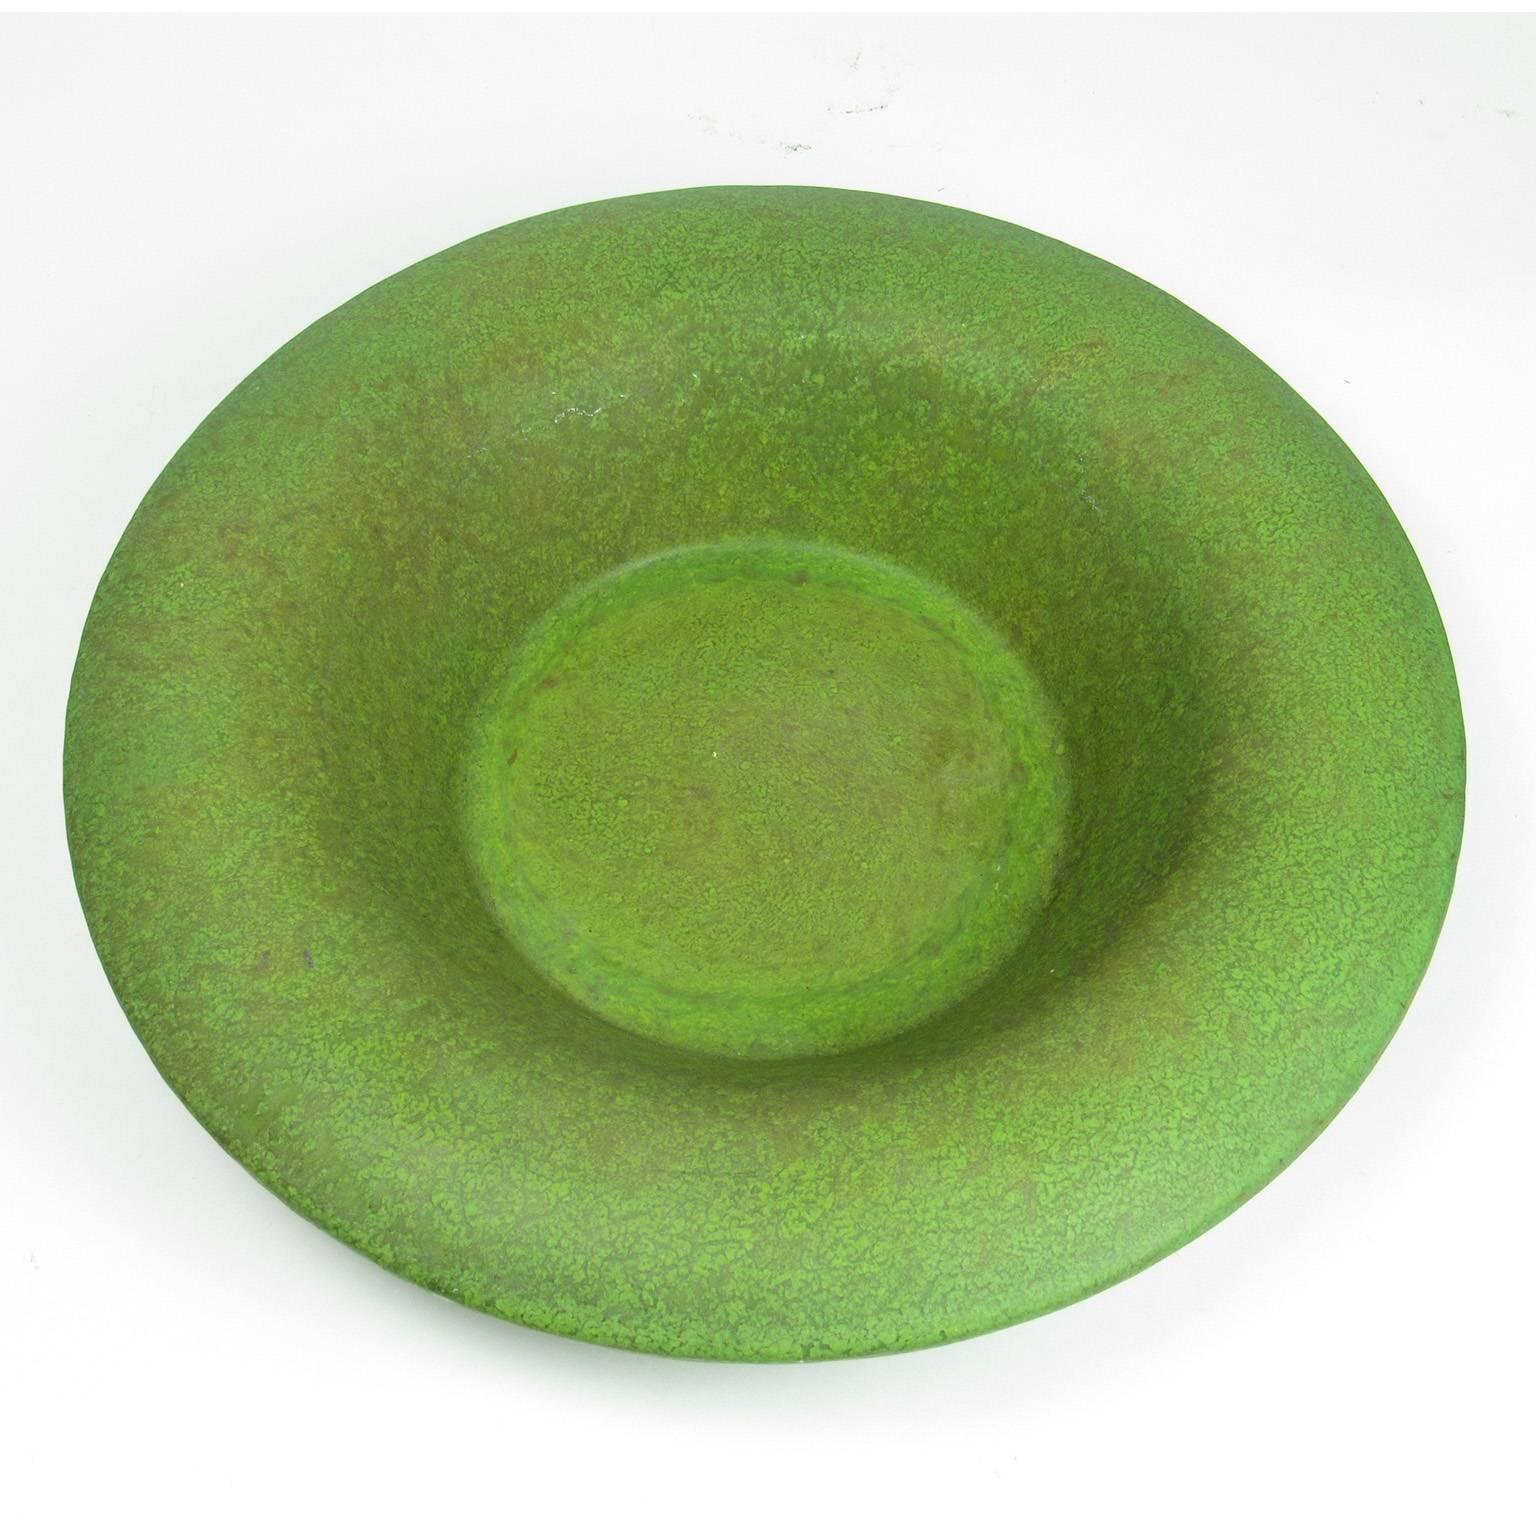 Unique Arts & Crafts period Mottled Matte green glazed ceramic shallow bowl with wide rim. Glaze appears similar to the cucumber matte green glazes of Hampshire Pottery (1883-1917) and Grueby Pottery. Unmarked. Diameter: 12 inches, height: 2 3/4